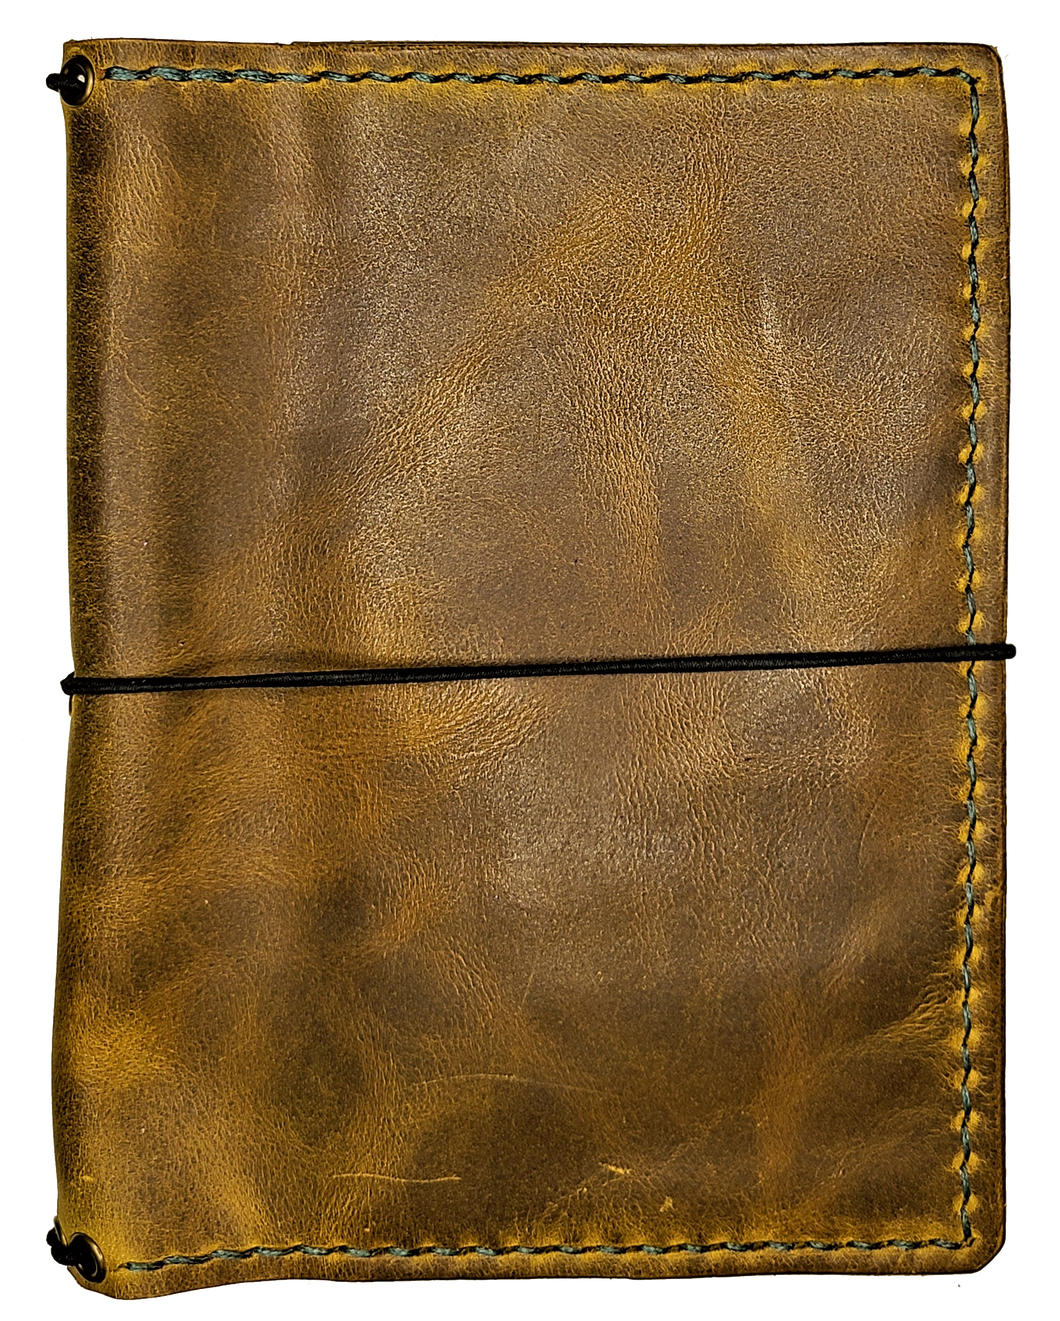 Steampunk Leather B6 Travelers Notebook